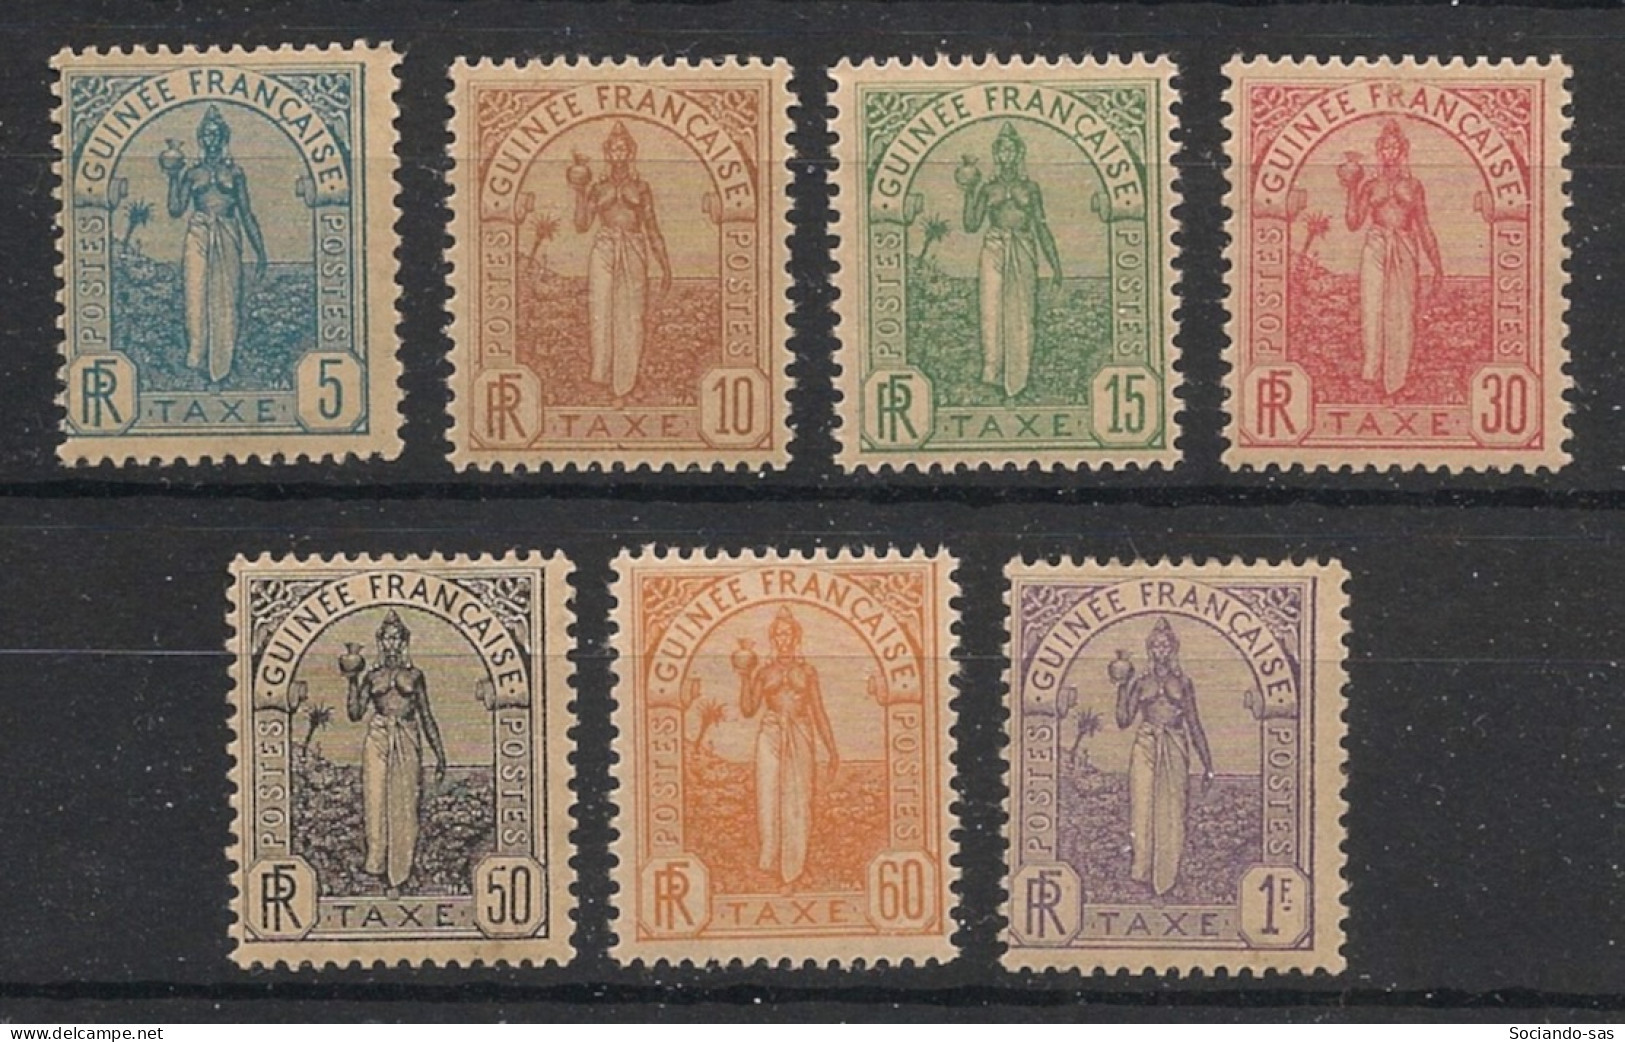 GUINEE - 1905 - Taxe TT N°YT 1 à 7 - Série Complète - Neuf Luxe ** / MNH - Unused Stamps